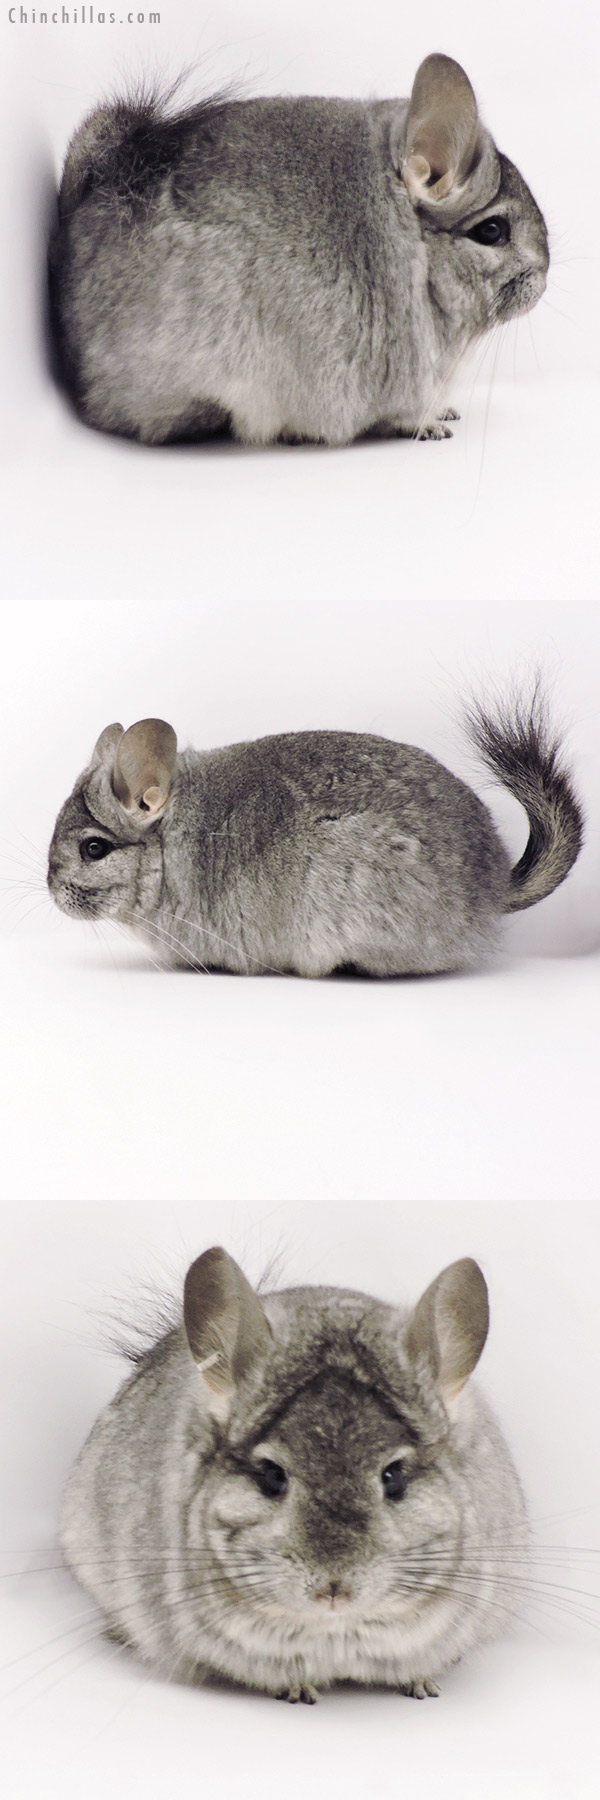 Chinchilla or related item offered for sale or export on Chinchillas.com - 19315 Standard  Royal Persian Angora Female Chinchilla